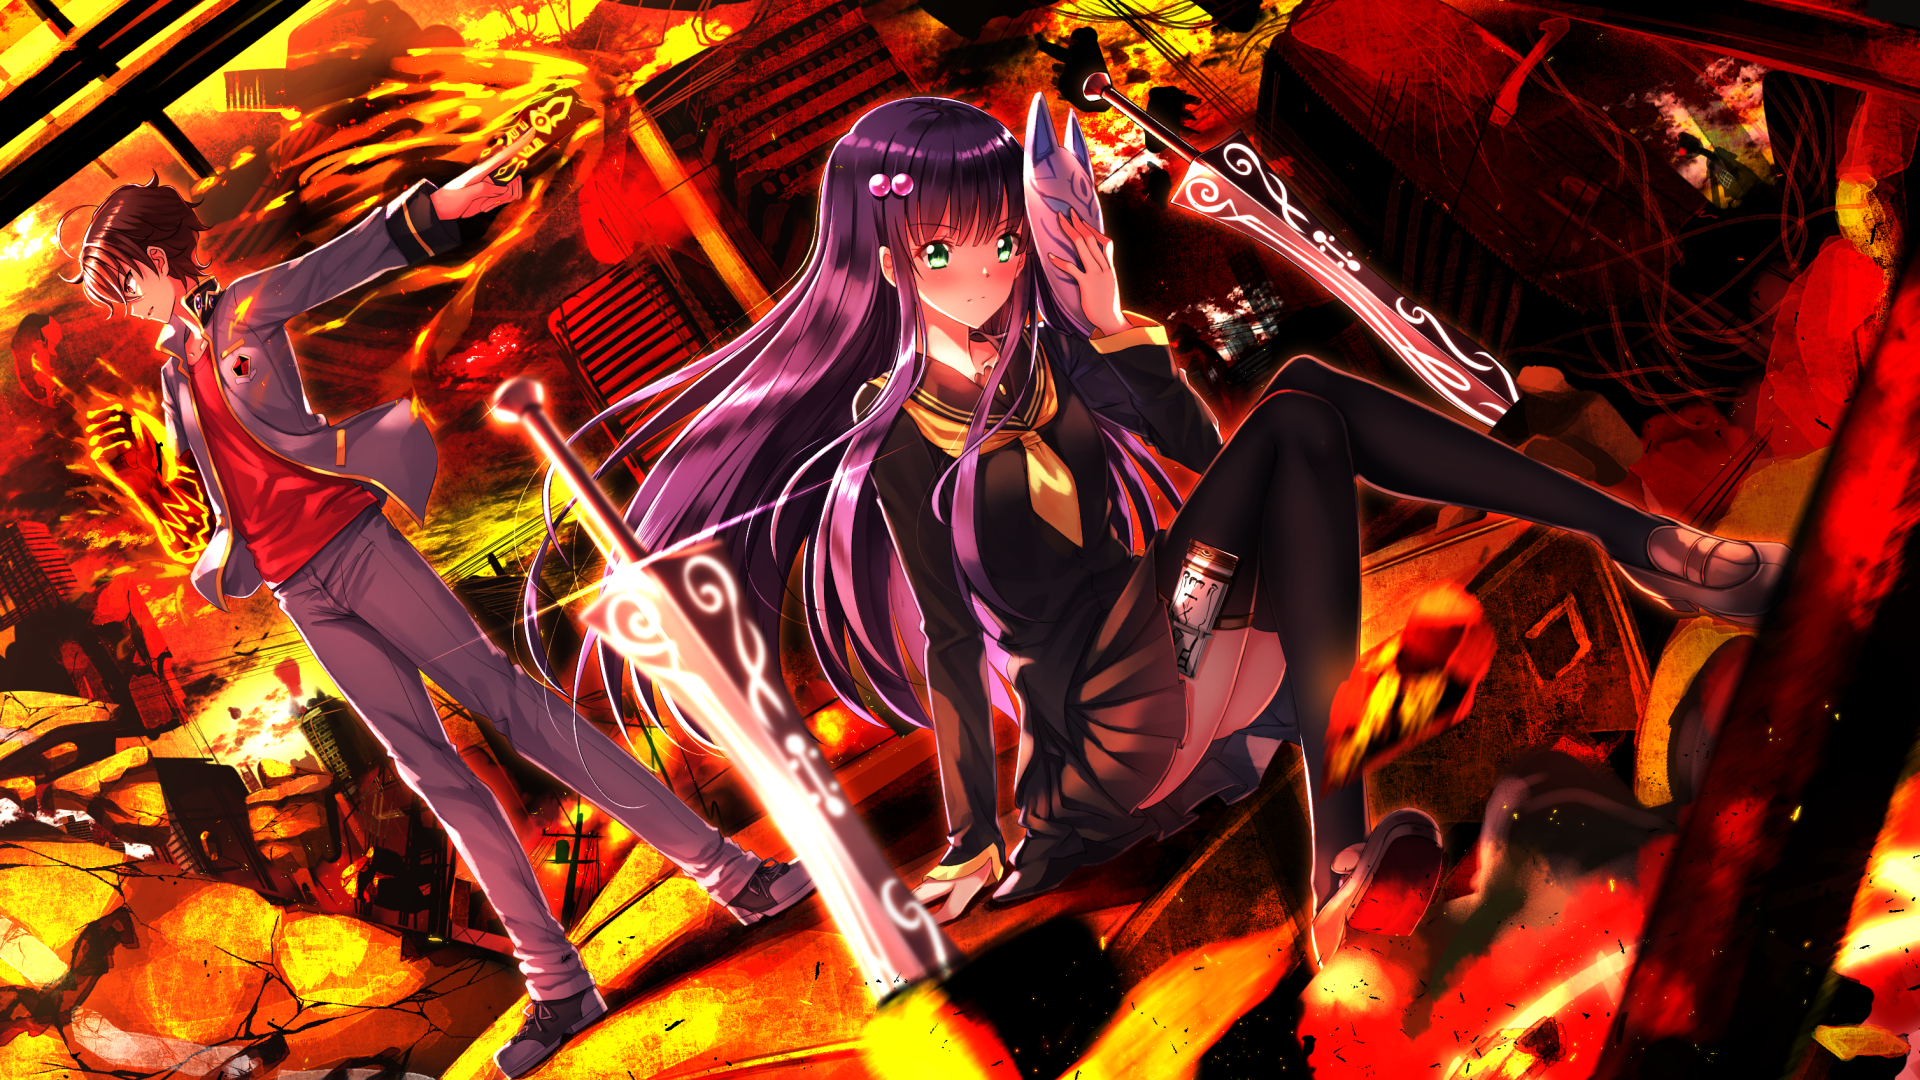 Twin Star Exorcists Backgrounds, Compatible - PC, Mobile, Gadgets| 1920x1080 px